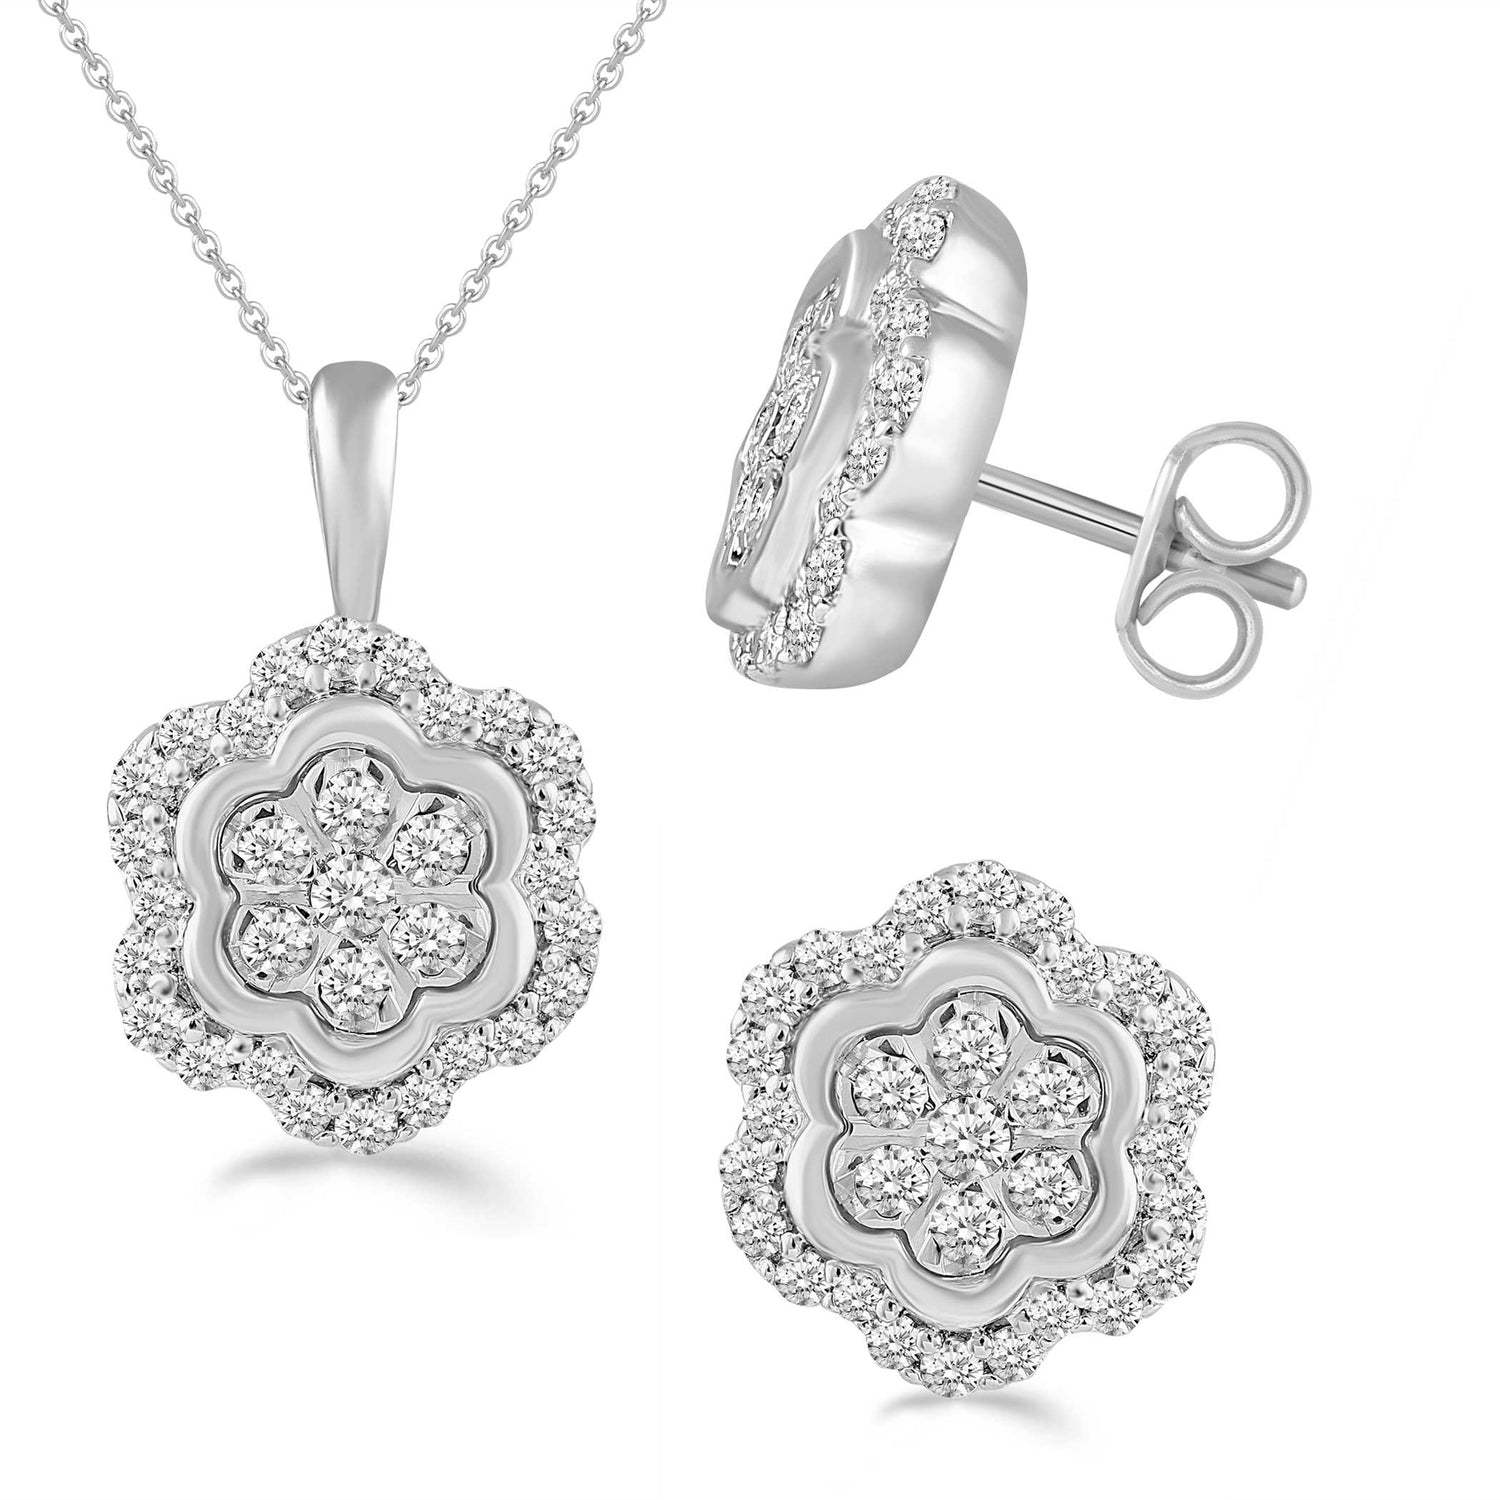 1/2 - 3/4 CTTW Diamond Floral Cluster Stud Earring/Pendant in Sterling Silver